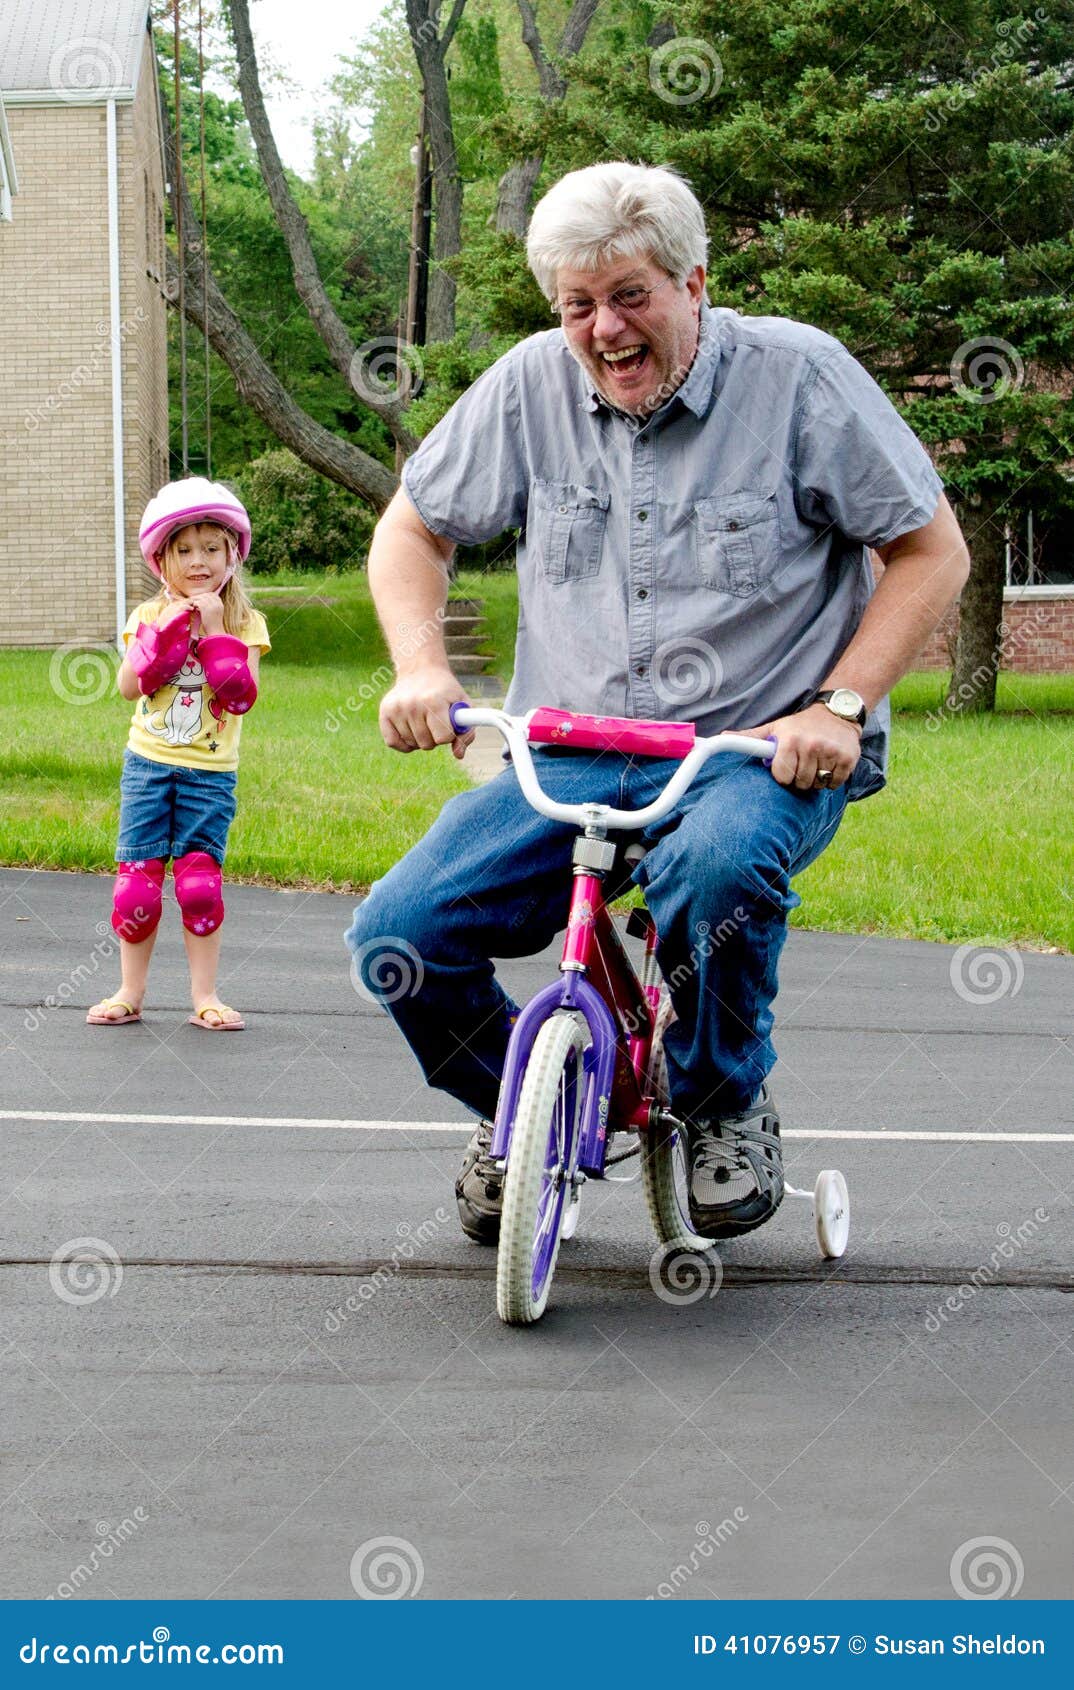 how old to ride a bike with training wheels